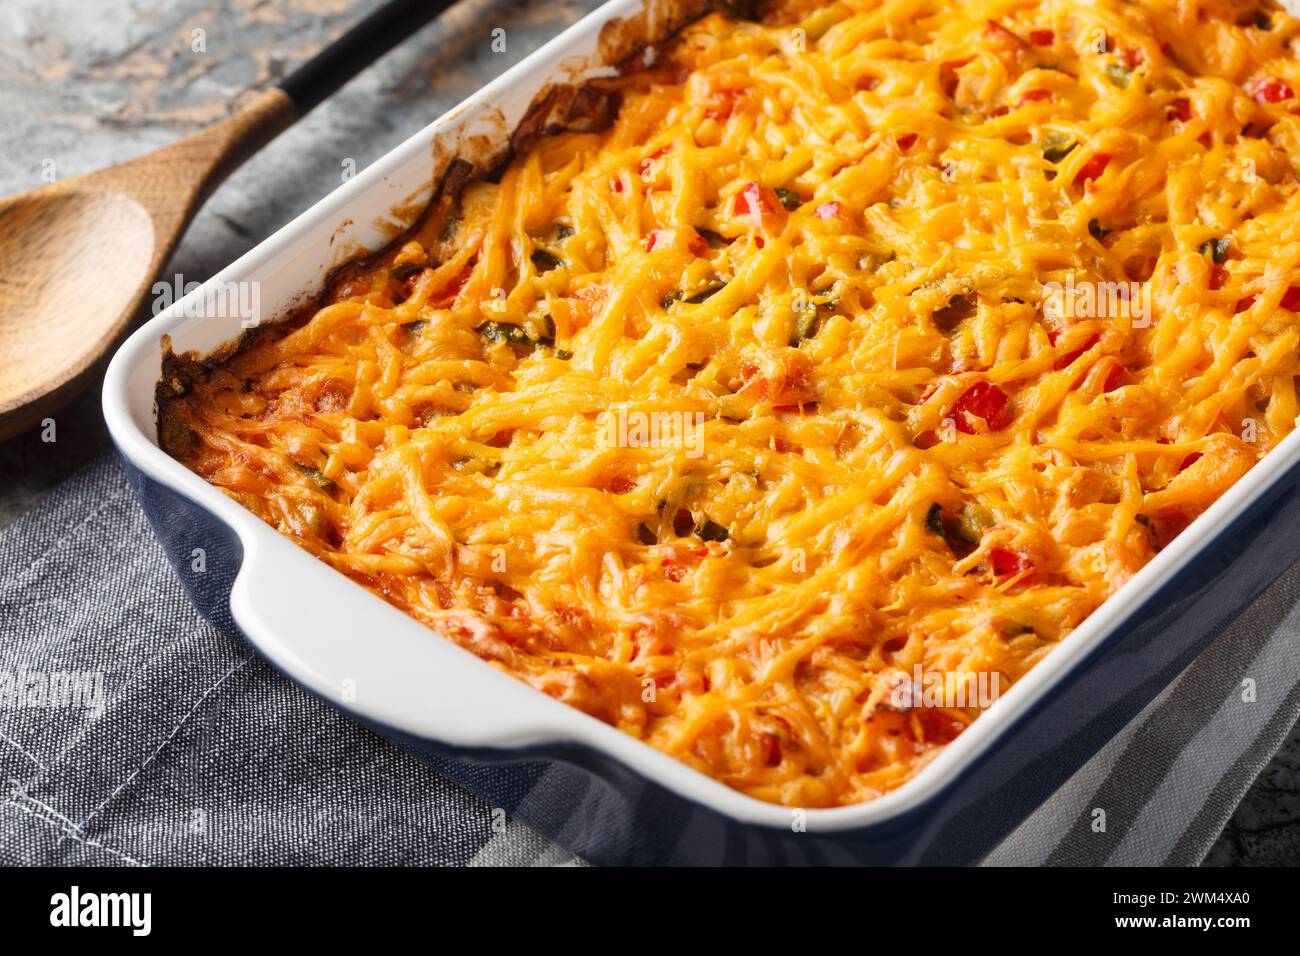 King Ranch Casserole is classic Texas comfort food with vegetables, cheddar cheese, tortilla and cream close-up in a baking dish on a marble table. Ho Stock Photo